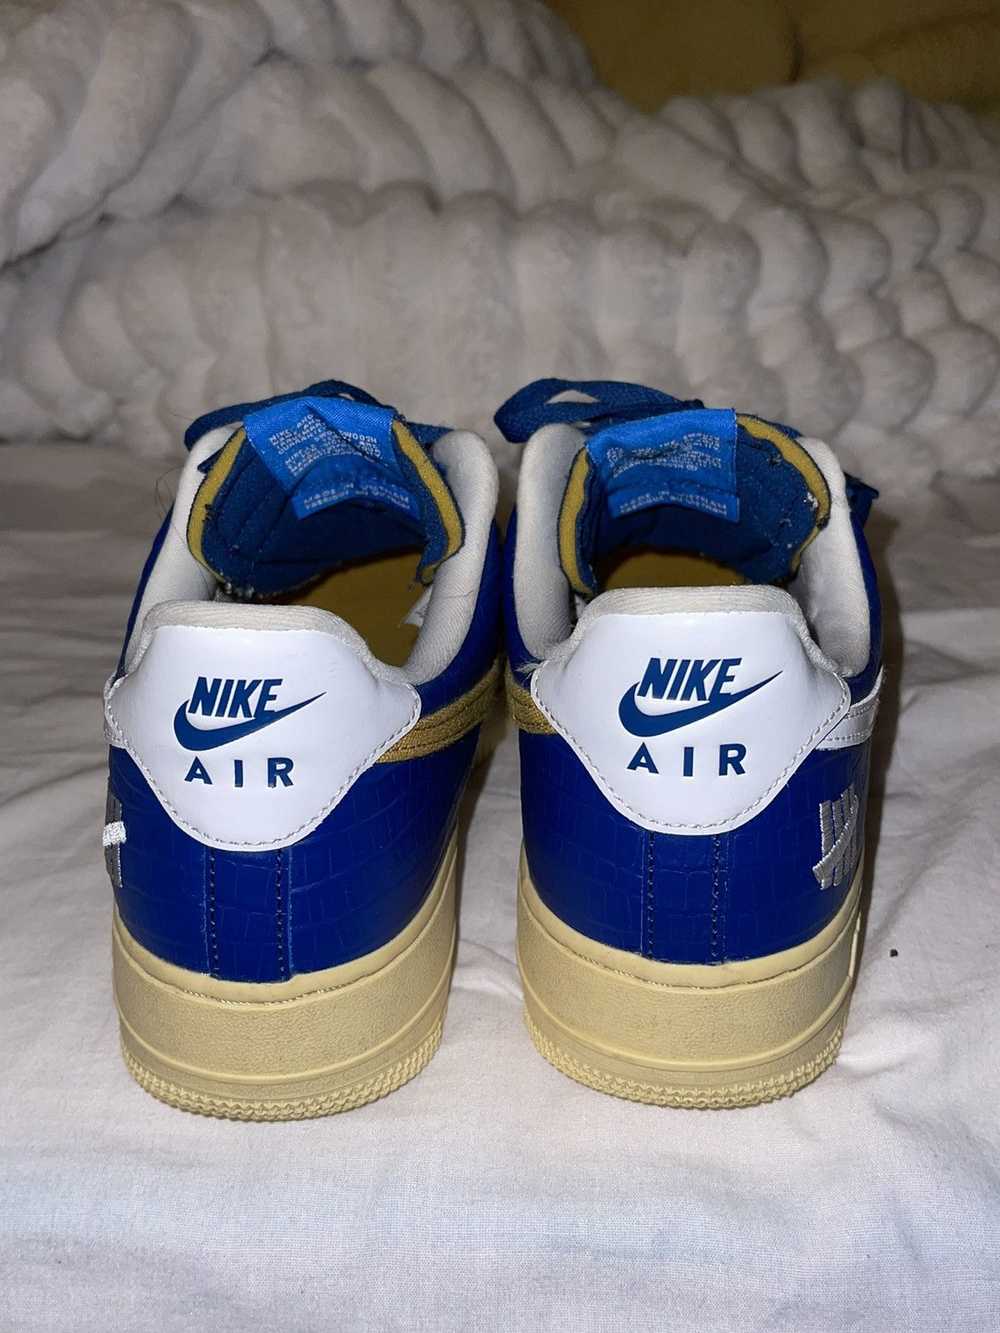 Nike Undefeated x Air Force 1 SP ‘Dunk vs AF1’ - image 5